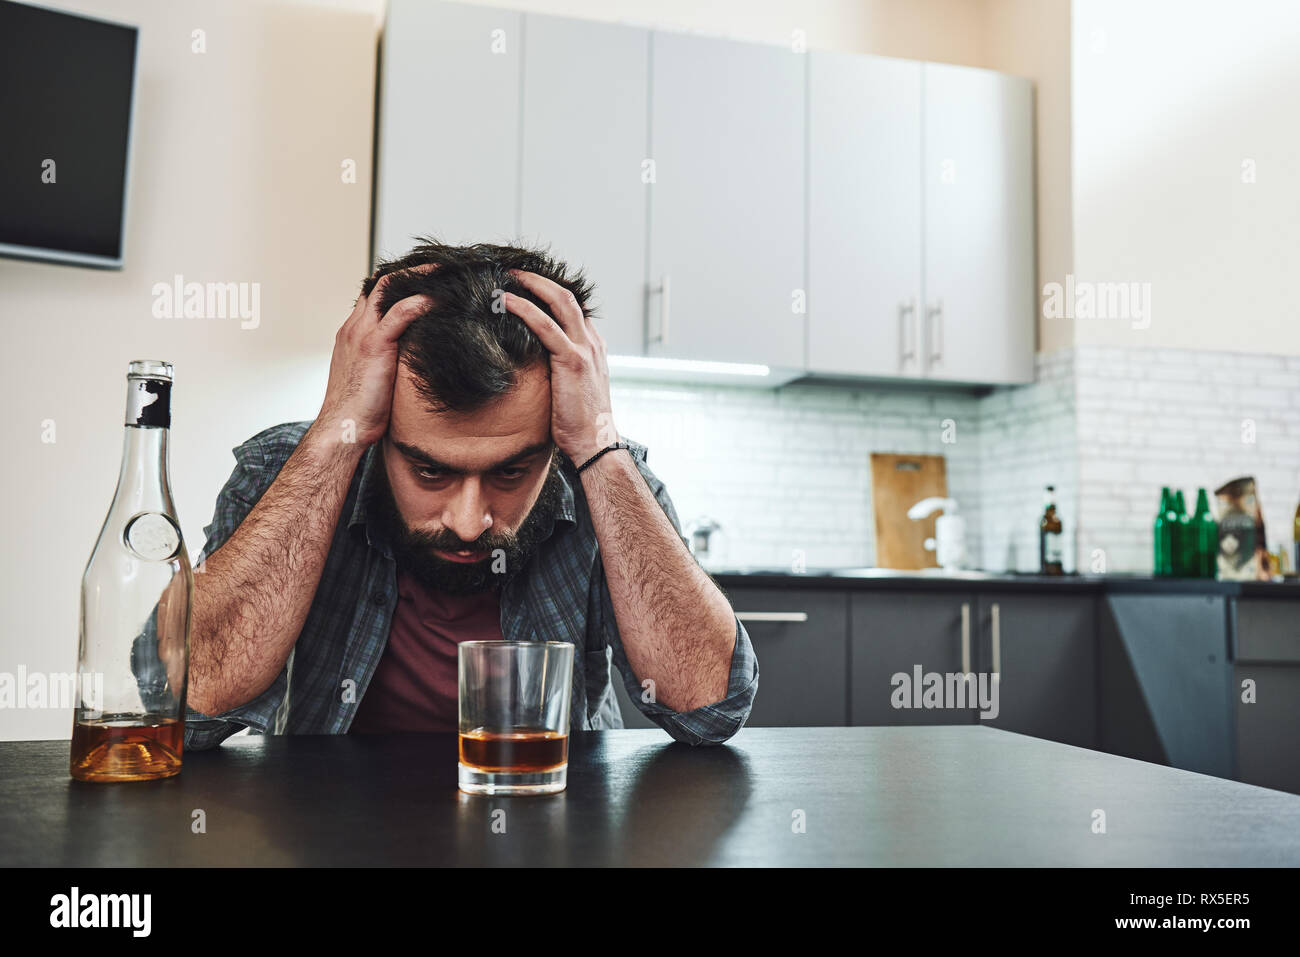 Drinking trouble. Depressed man sits at the table with his head in his hands. A glass of whiskey stands in front of him. Stock Photo